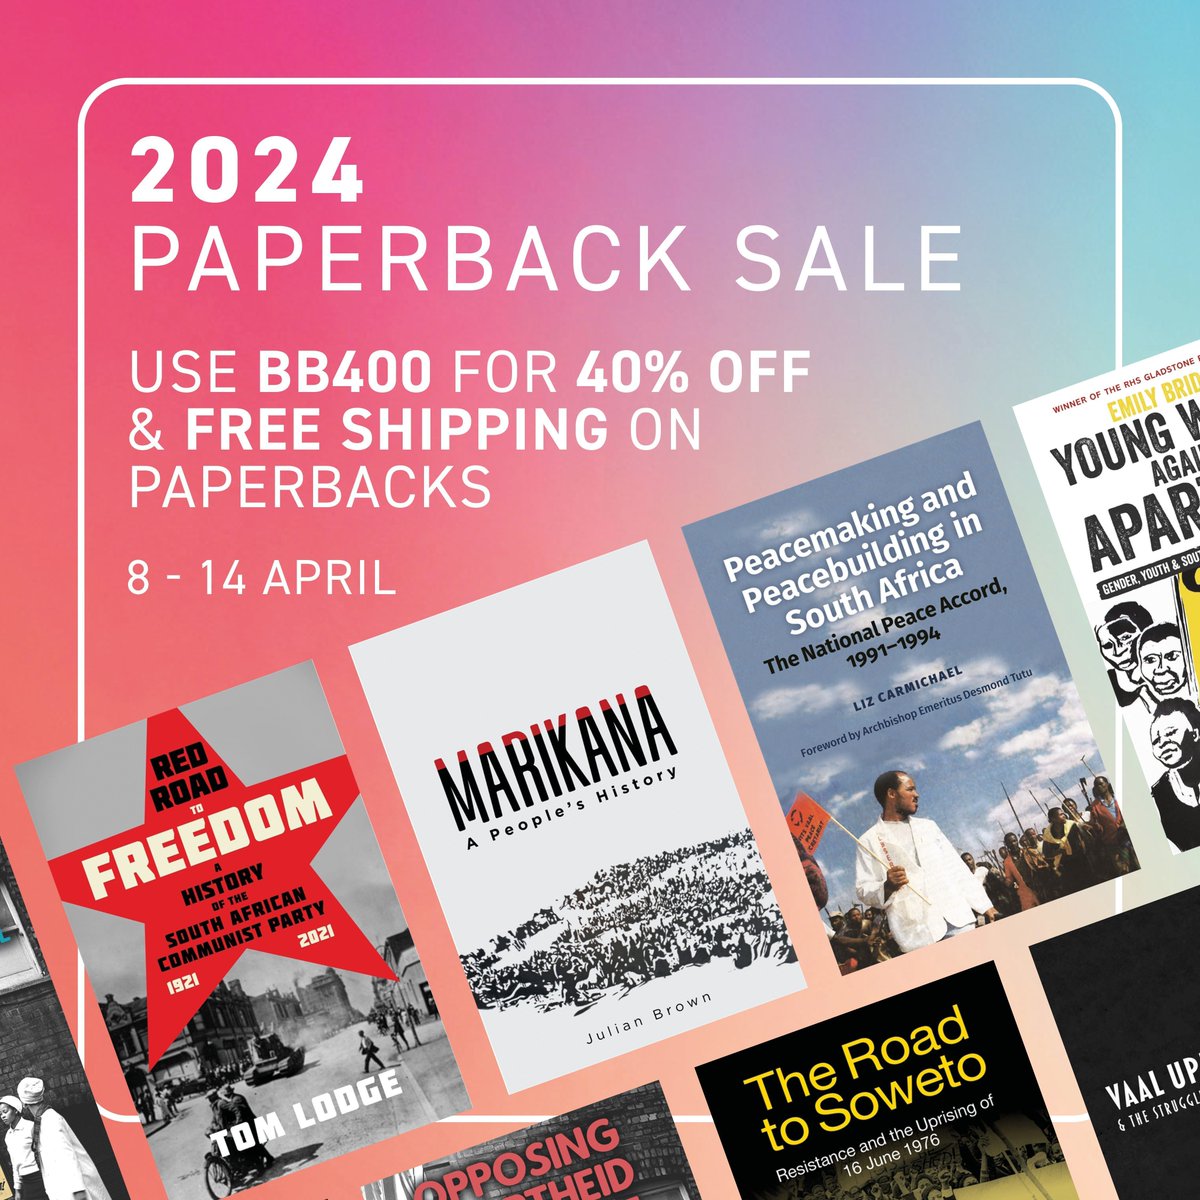 Have you checked out our paperback sale yet? These titles focused on the history, politics and culture of #SouthAfrica are among the more than 1400 books on offer. 40% off and free shipping until 14 April: buff.ly/3J8zOzj #BookSale